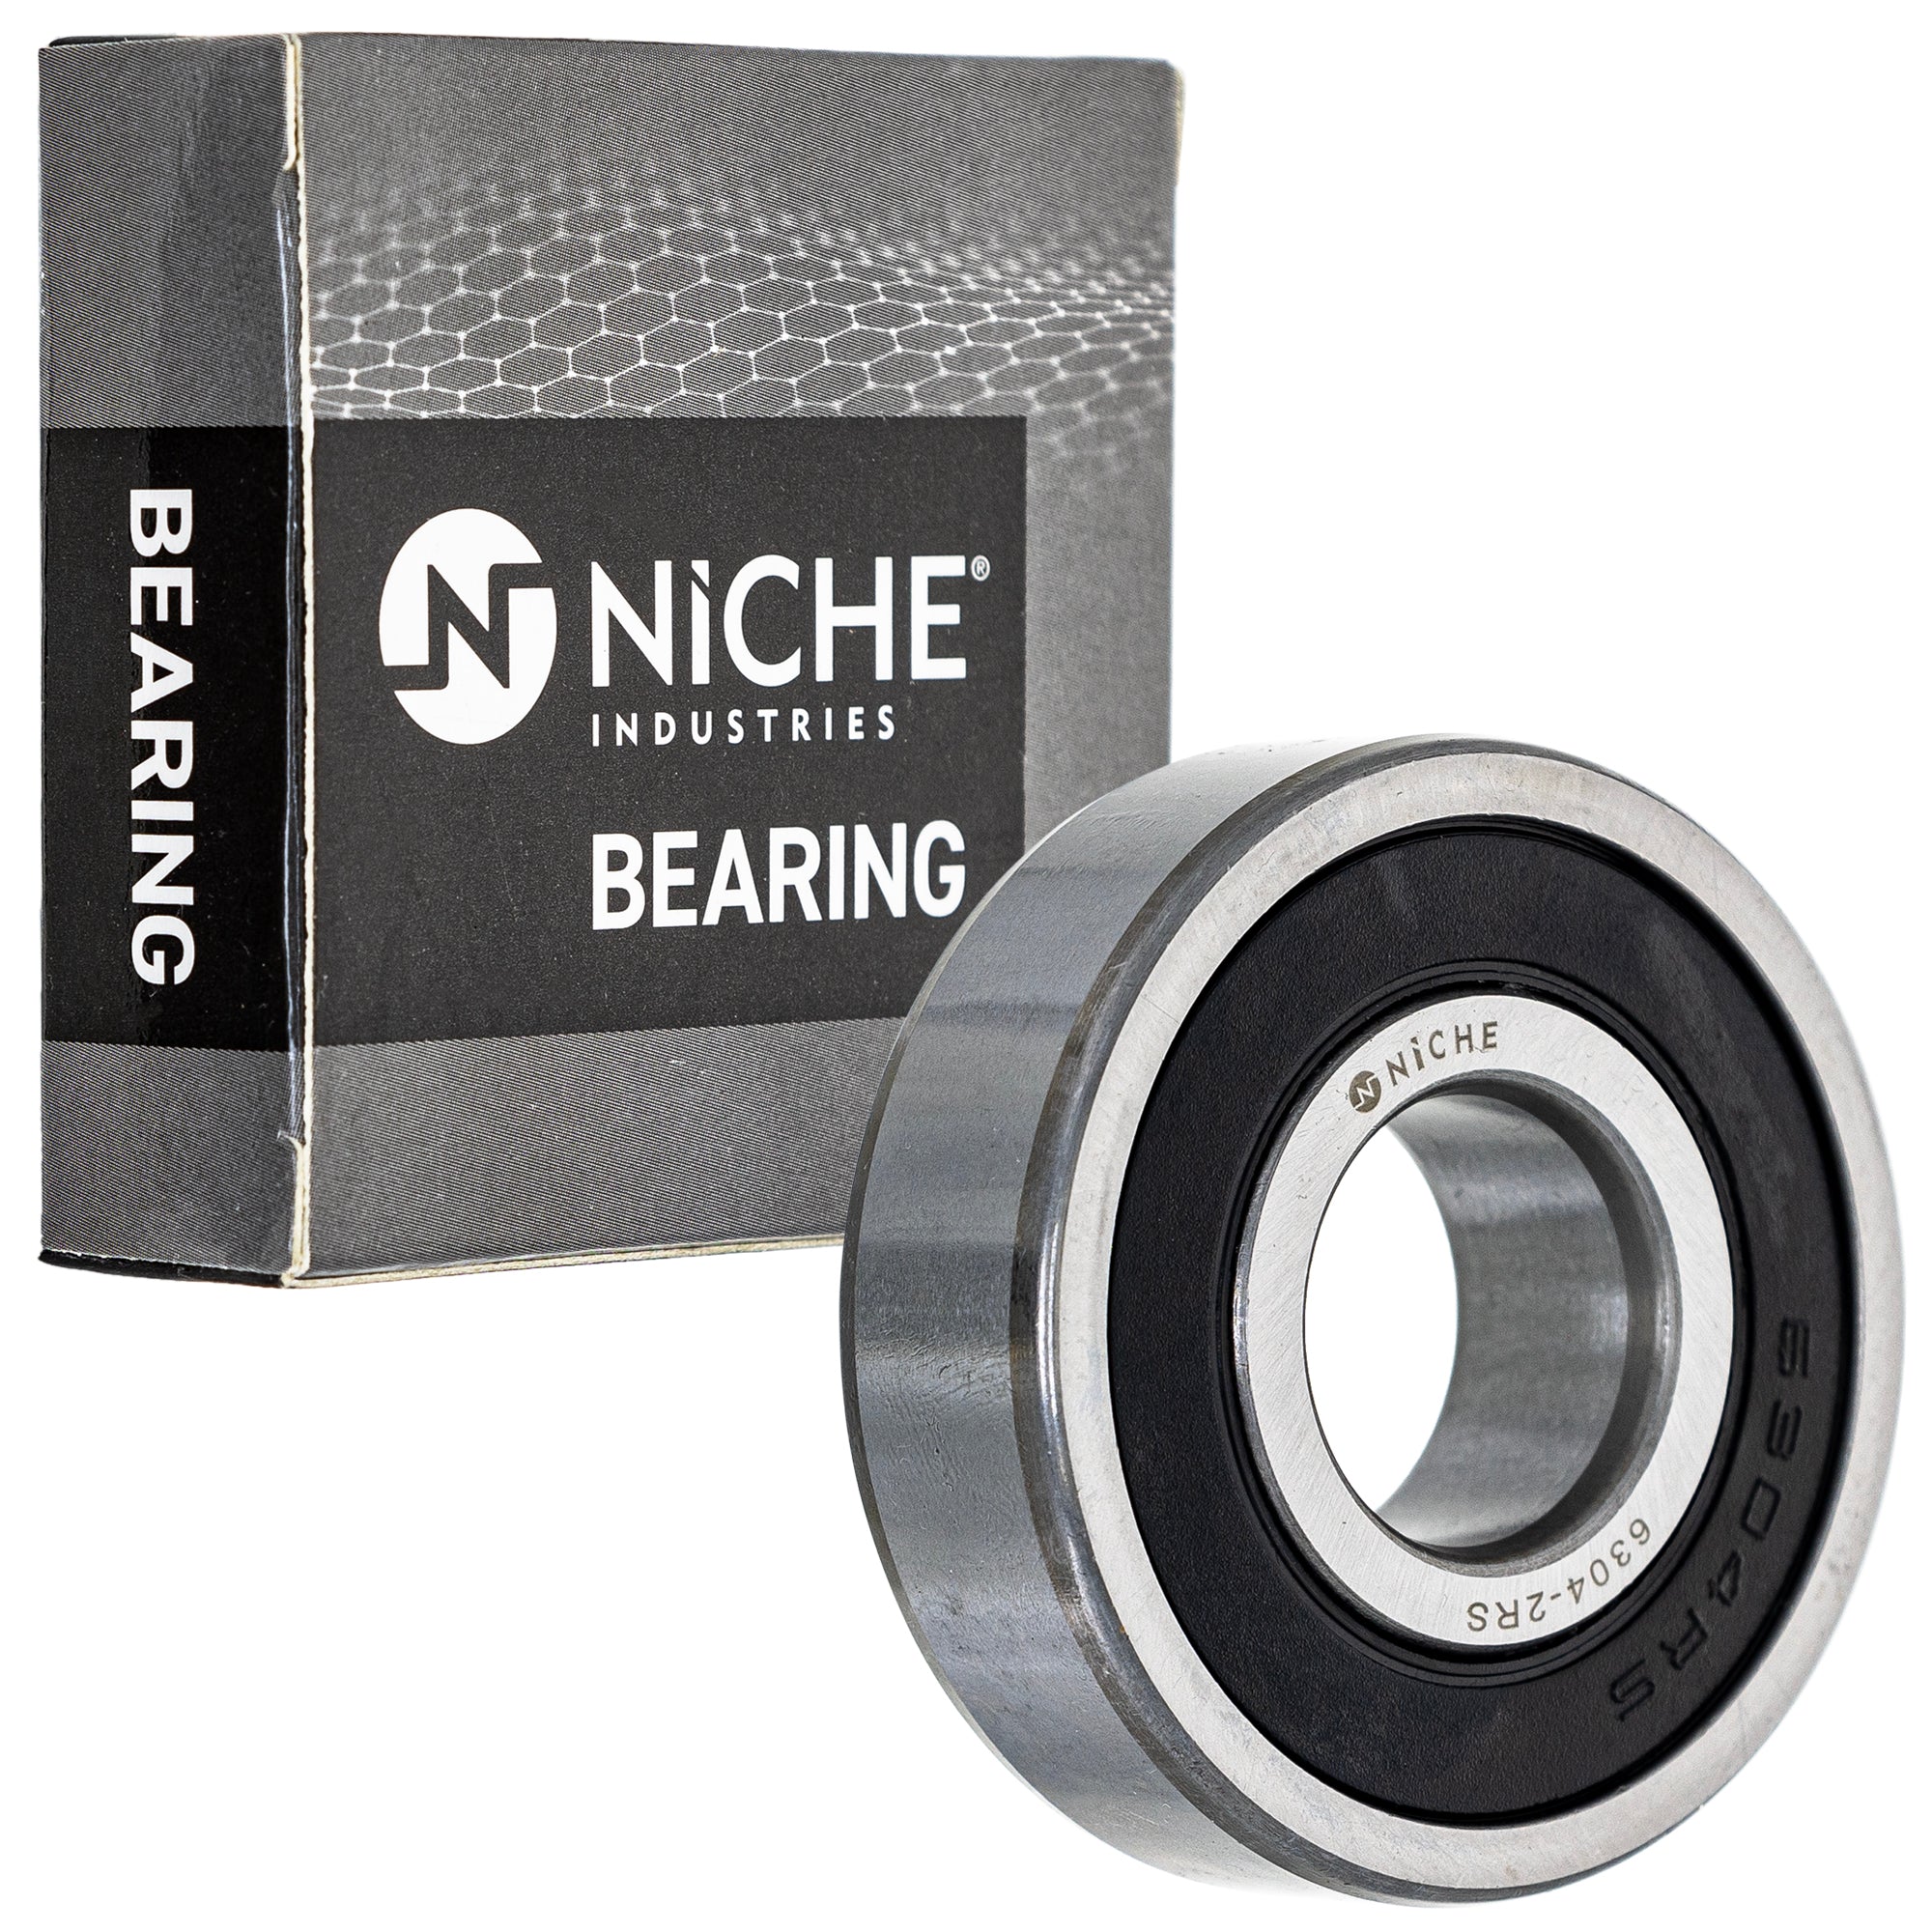 NICHE 519-CBB2244R Bearing 2-Pack for zOTHER XS500 Vision TS100